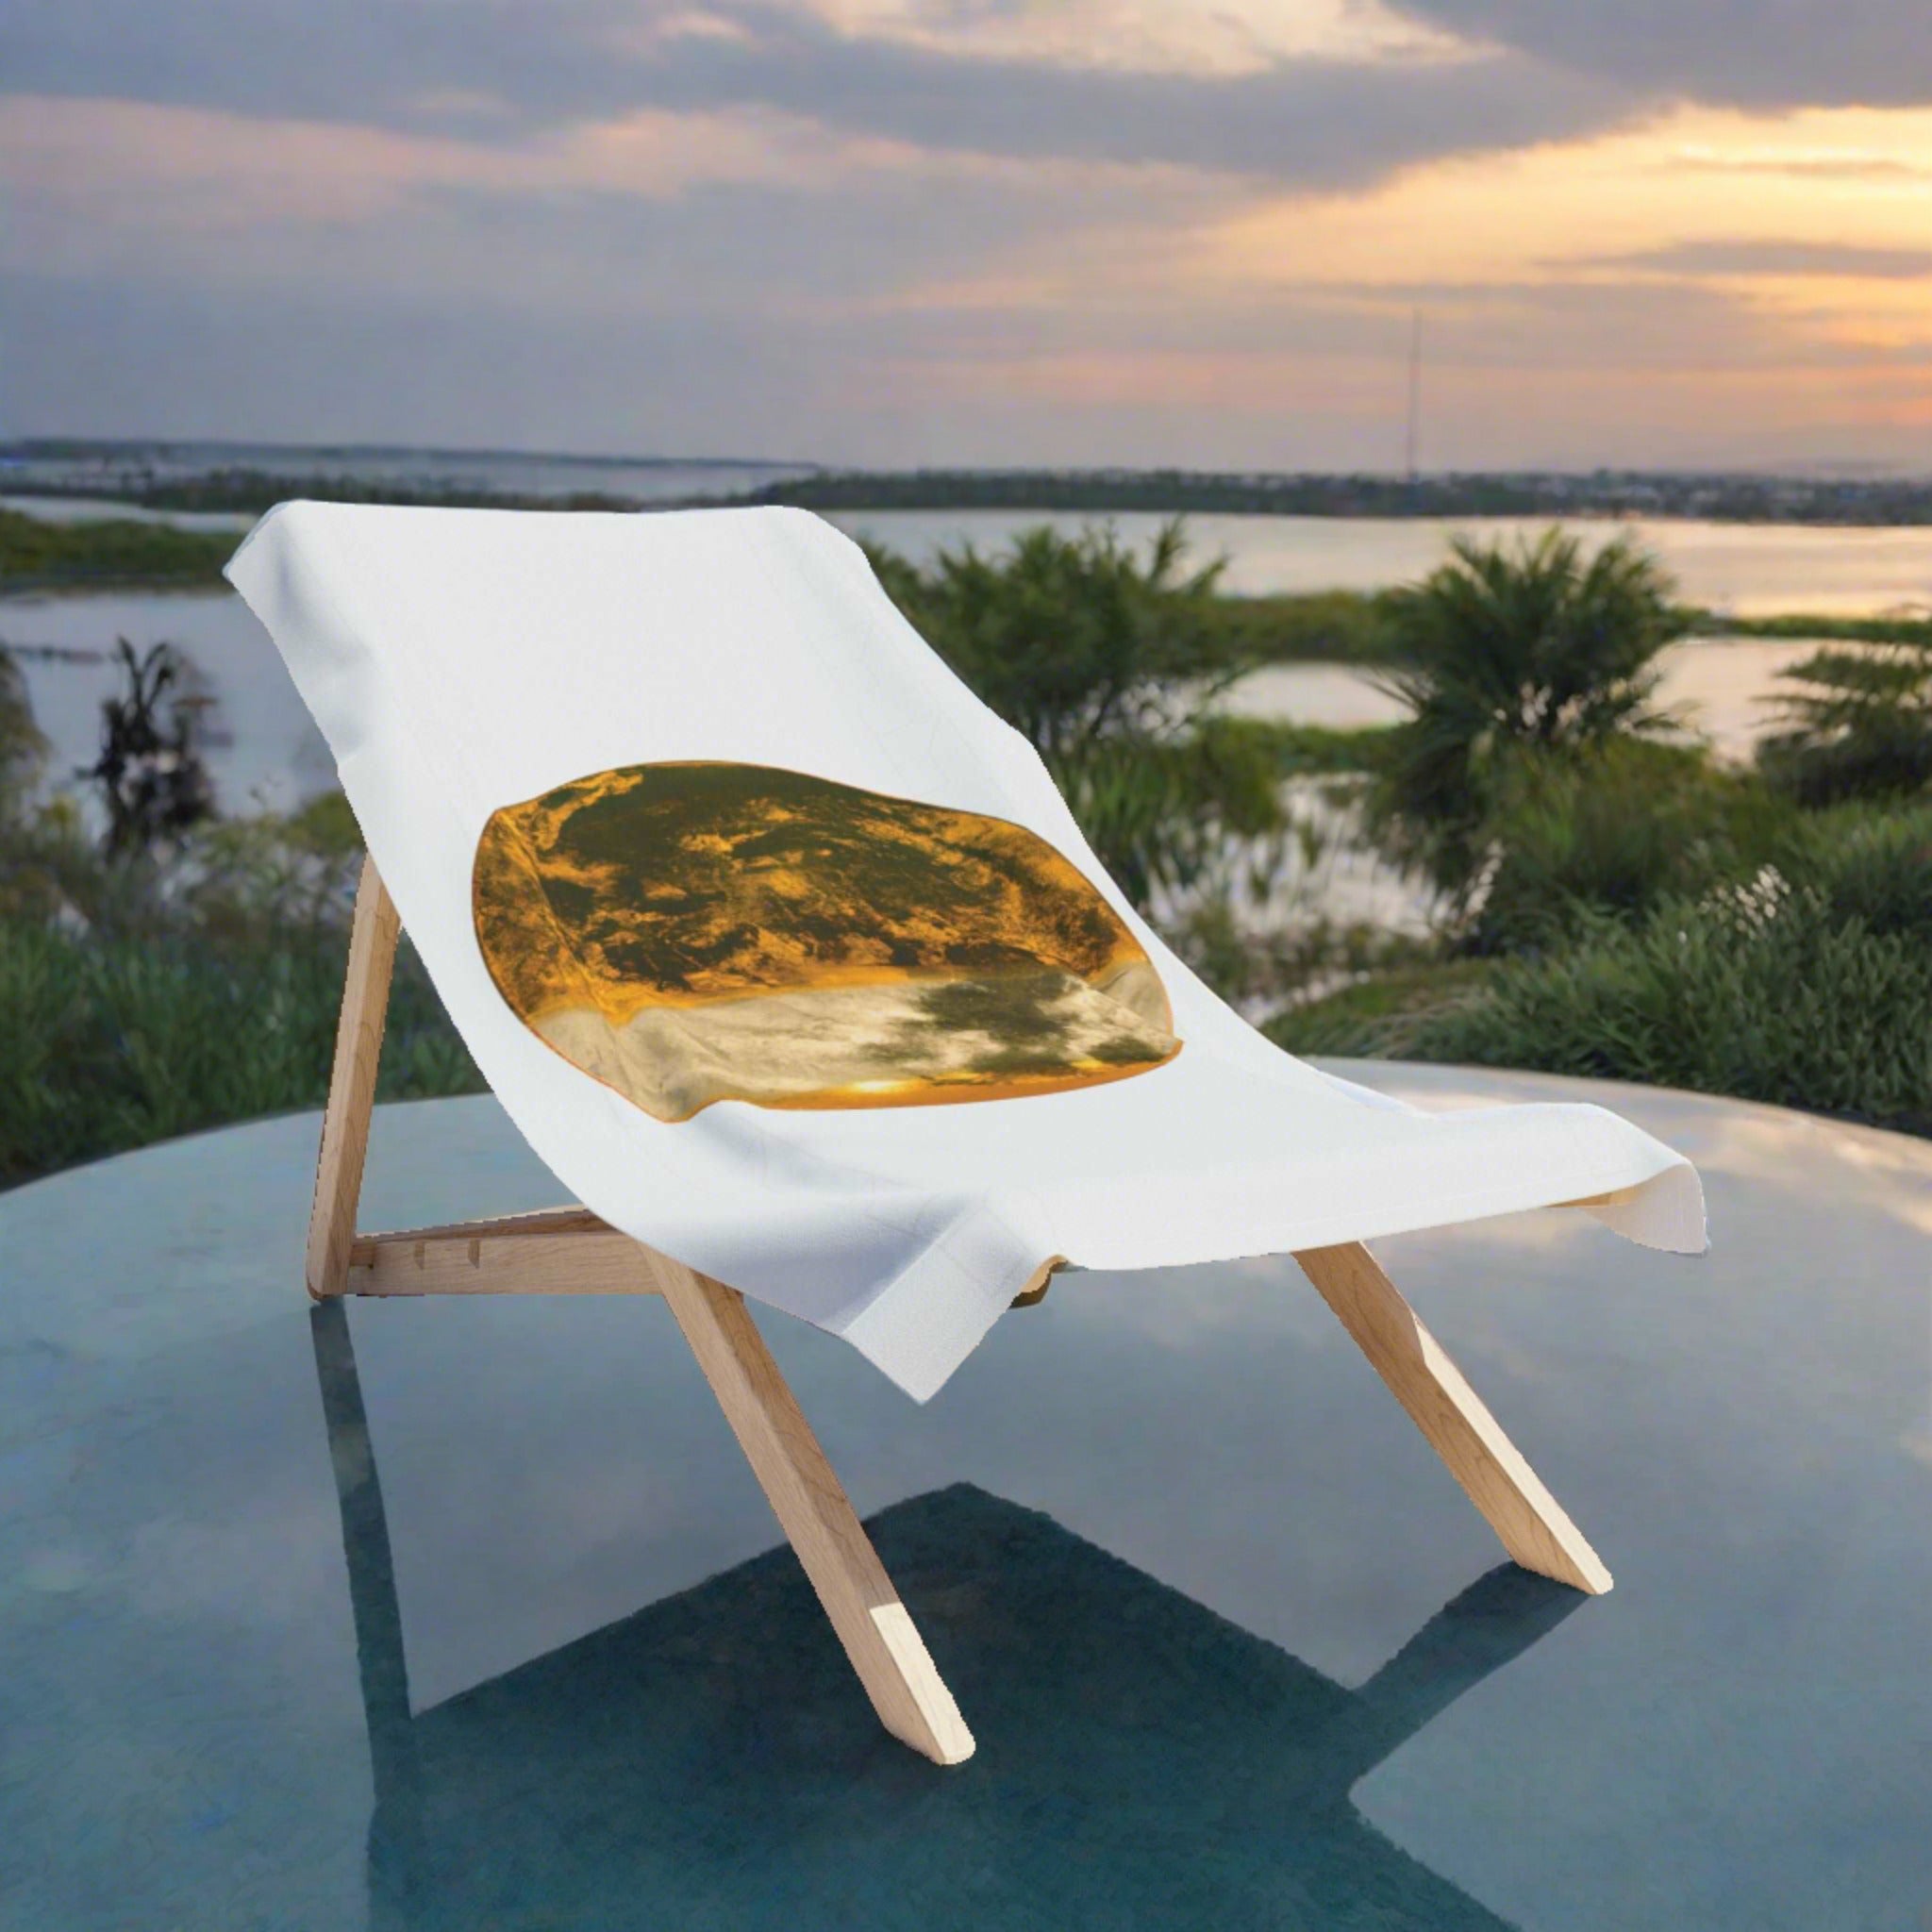 As evening falls, the Gilded Twilight Collection bath towel lies on a wooden deckchair standing on a round glass platform by a tranquil lakeside. The last rays of the sun cast a golden glow over the scene, mirroring the towel’s warm hues. The water and sky provide a serene backdrop of deepening blues and greens, highlighting the towel's rich design